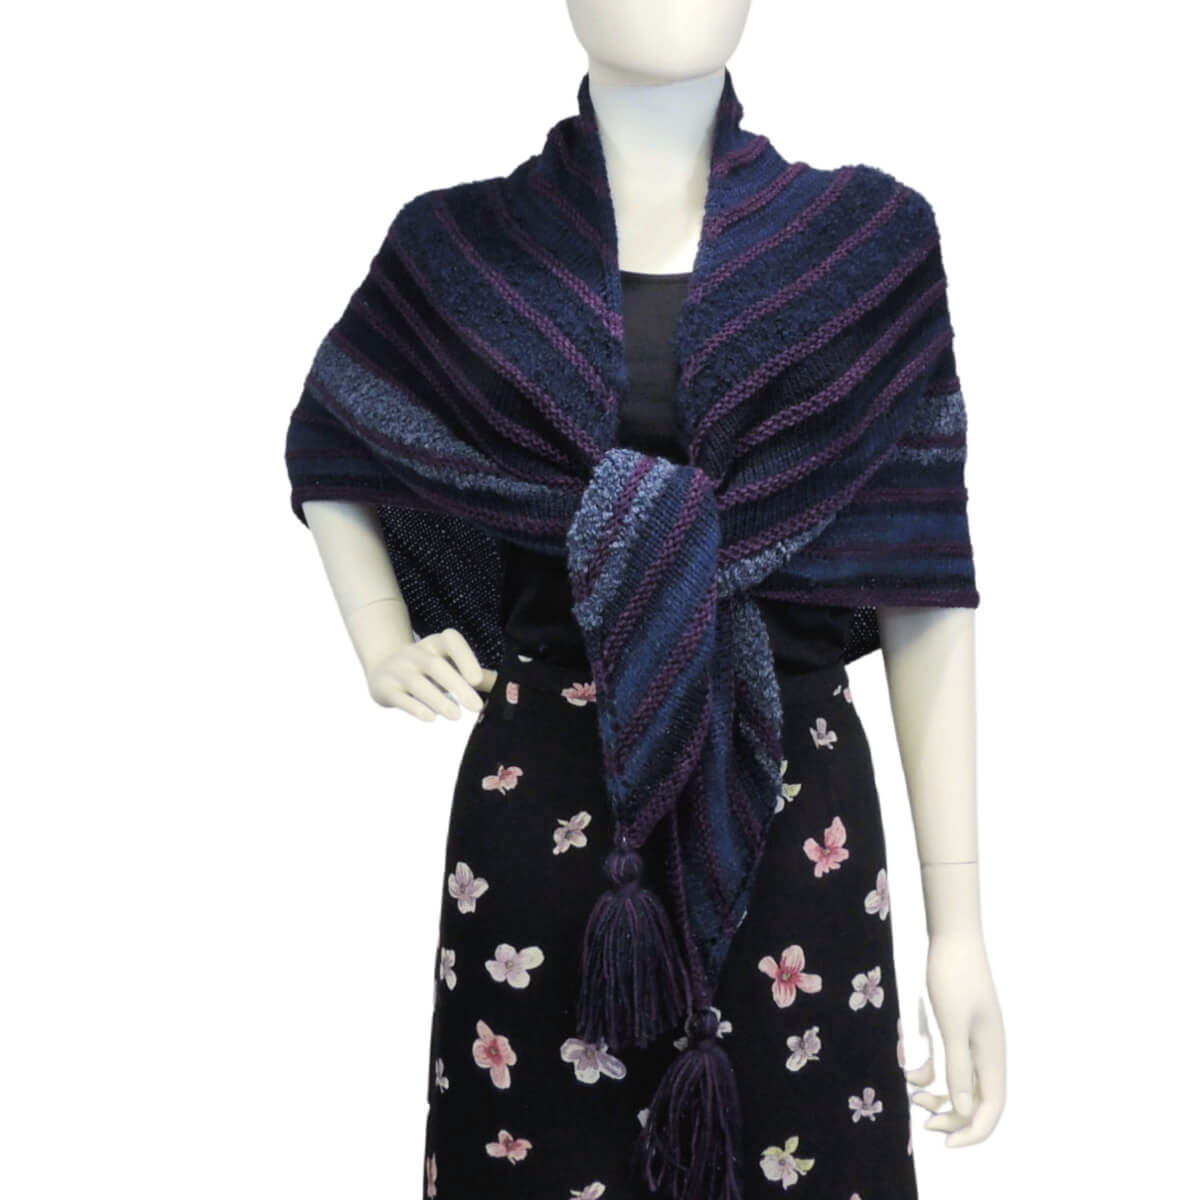 Front view of a white mannequin wearing a black skirt, black tank top, and a large triangular shawl in shades of blue with small raised stripes of purple every few inches, oversized tassels hang off the 3 points. The triangle shawl is a right angle with 2 equal sides, the center of the long side is at the back of the neck and wraps to the front where it's tied together just above the waist.